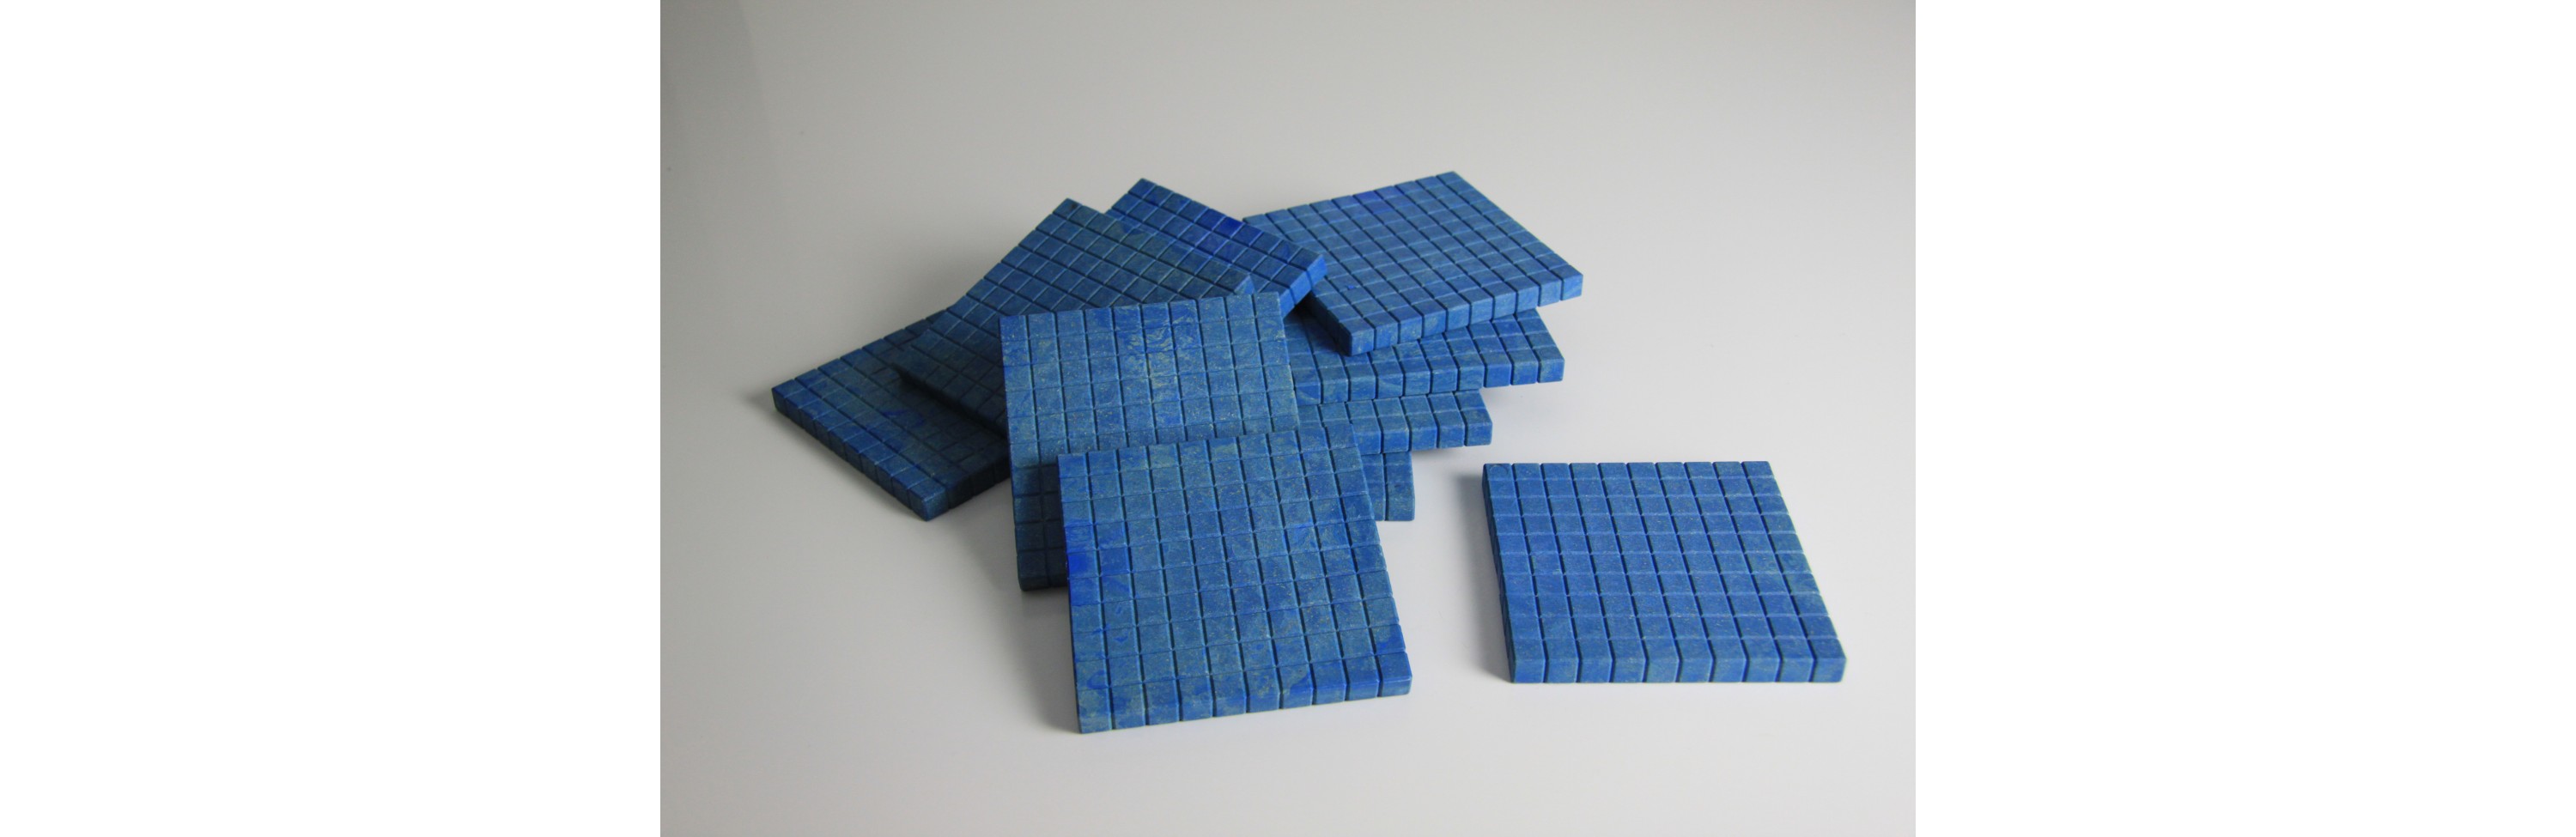 Wissner® active learning - Dienes Base Ten Hundred flats blue (10 pcs) RE-Wood®